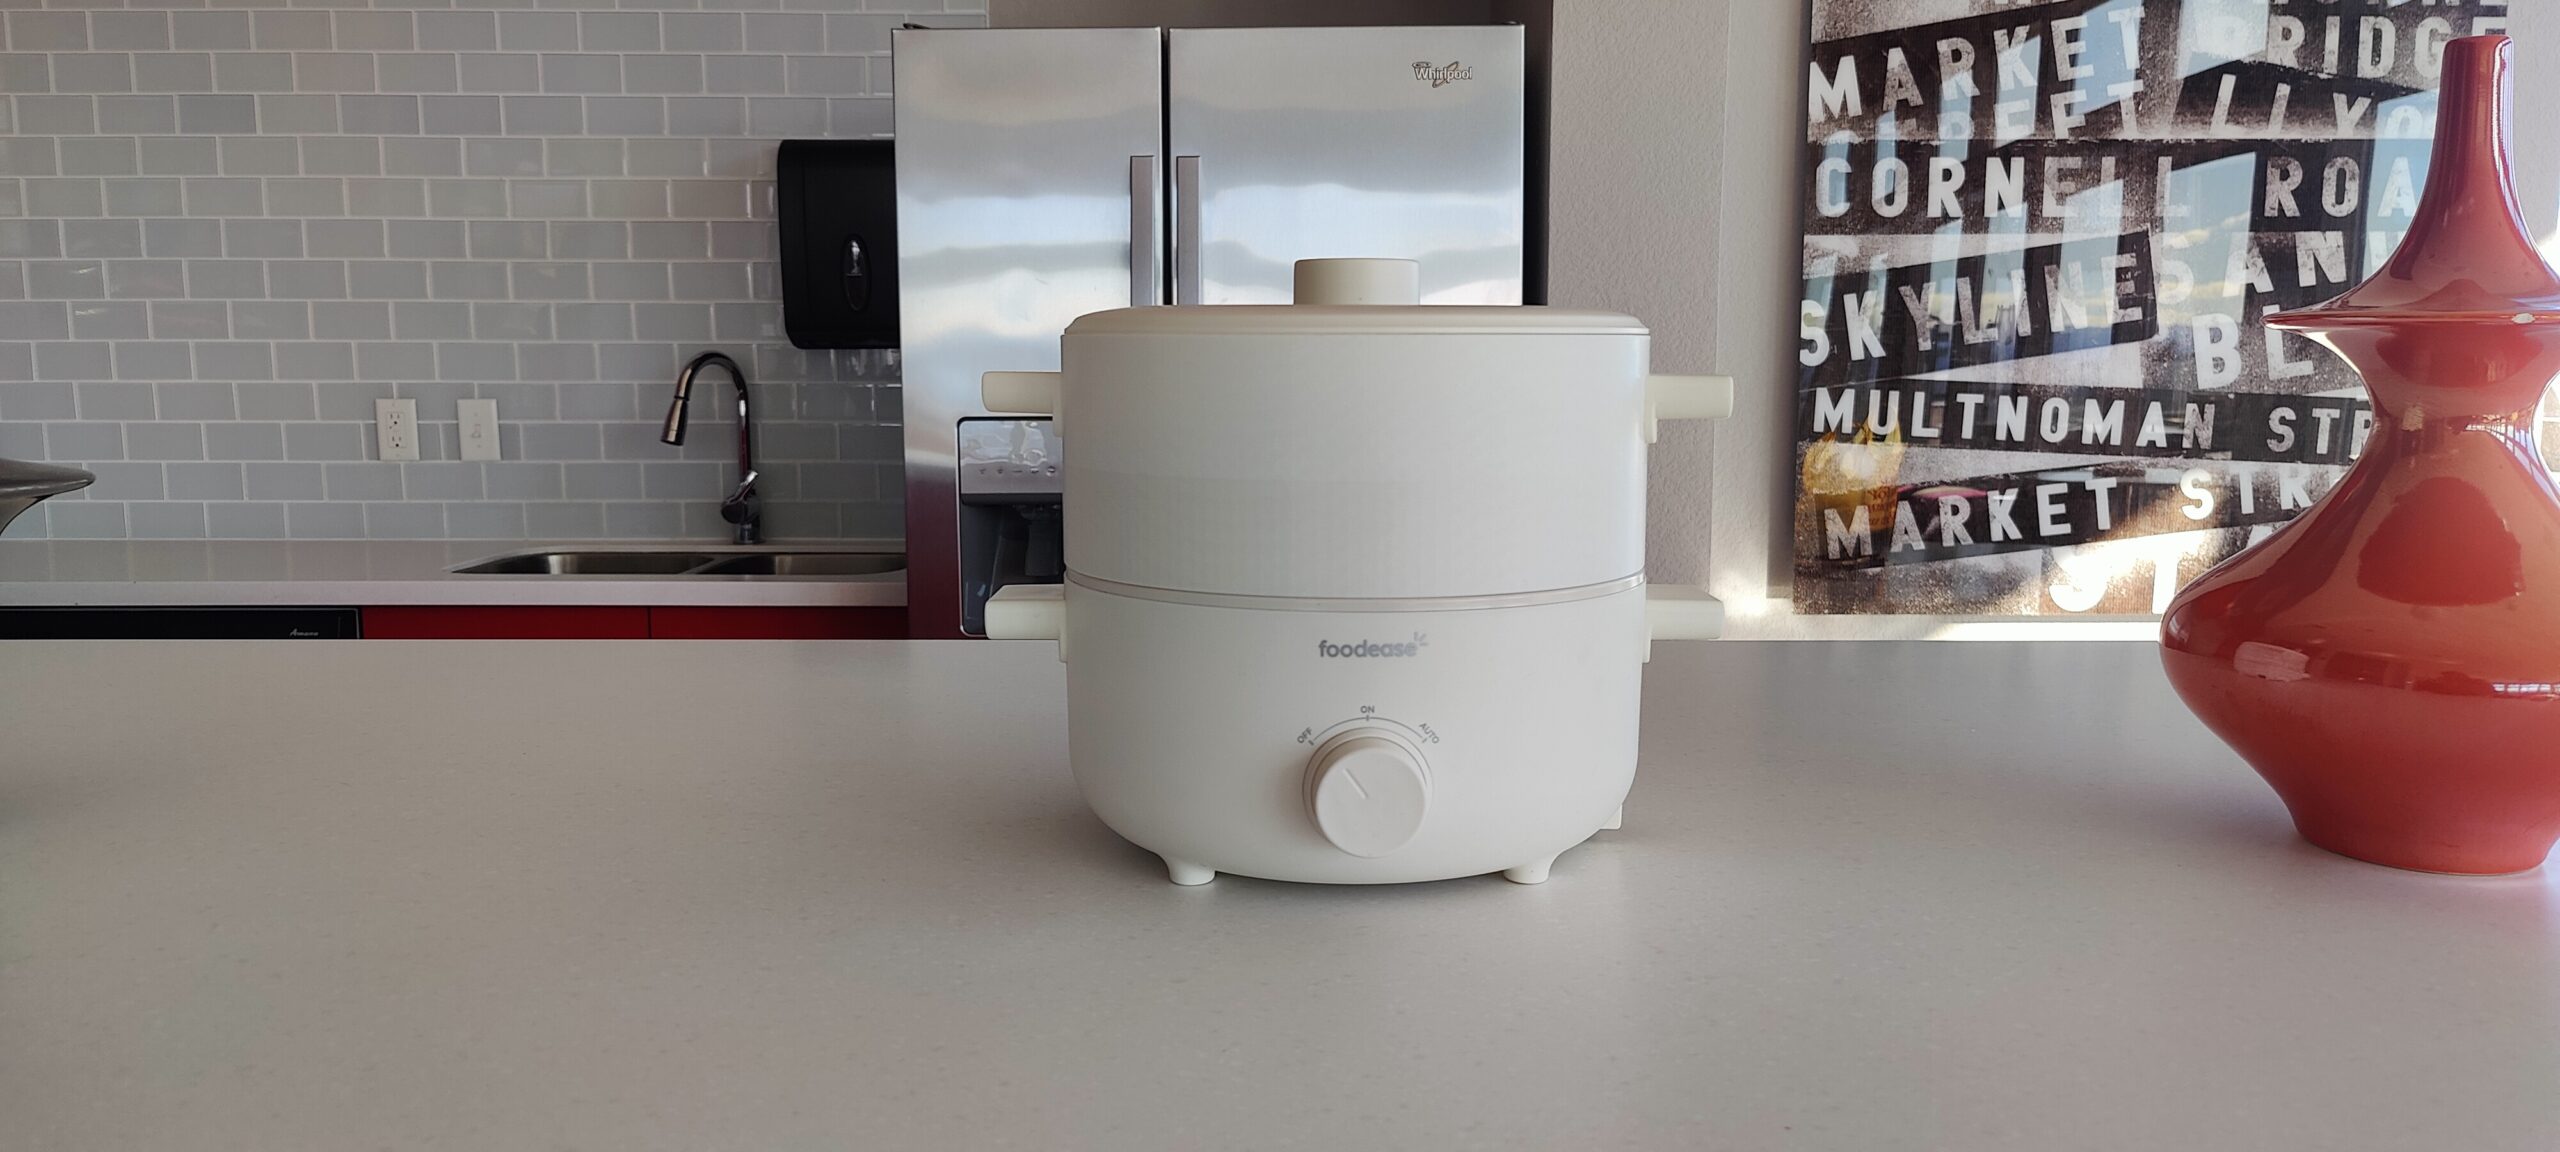 Foodease: All-in-One Automatic Smart Cooking Appliance by foodease